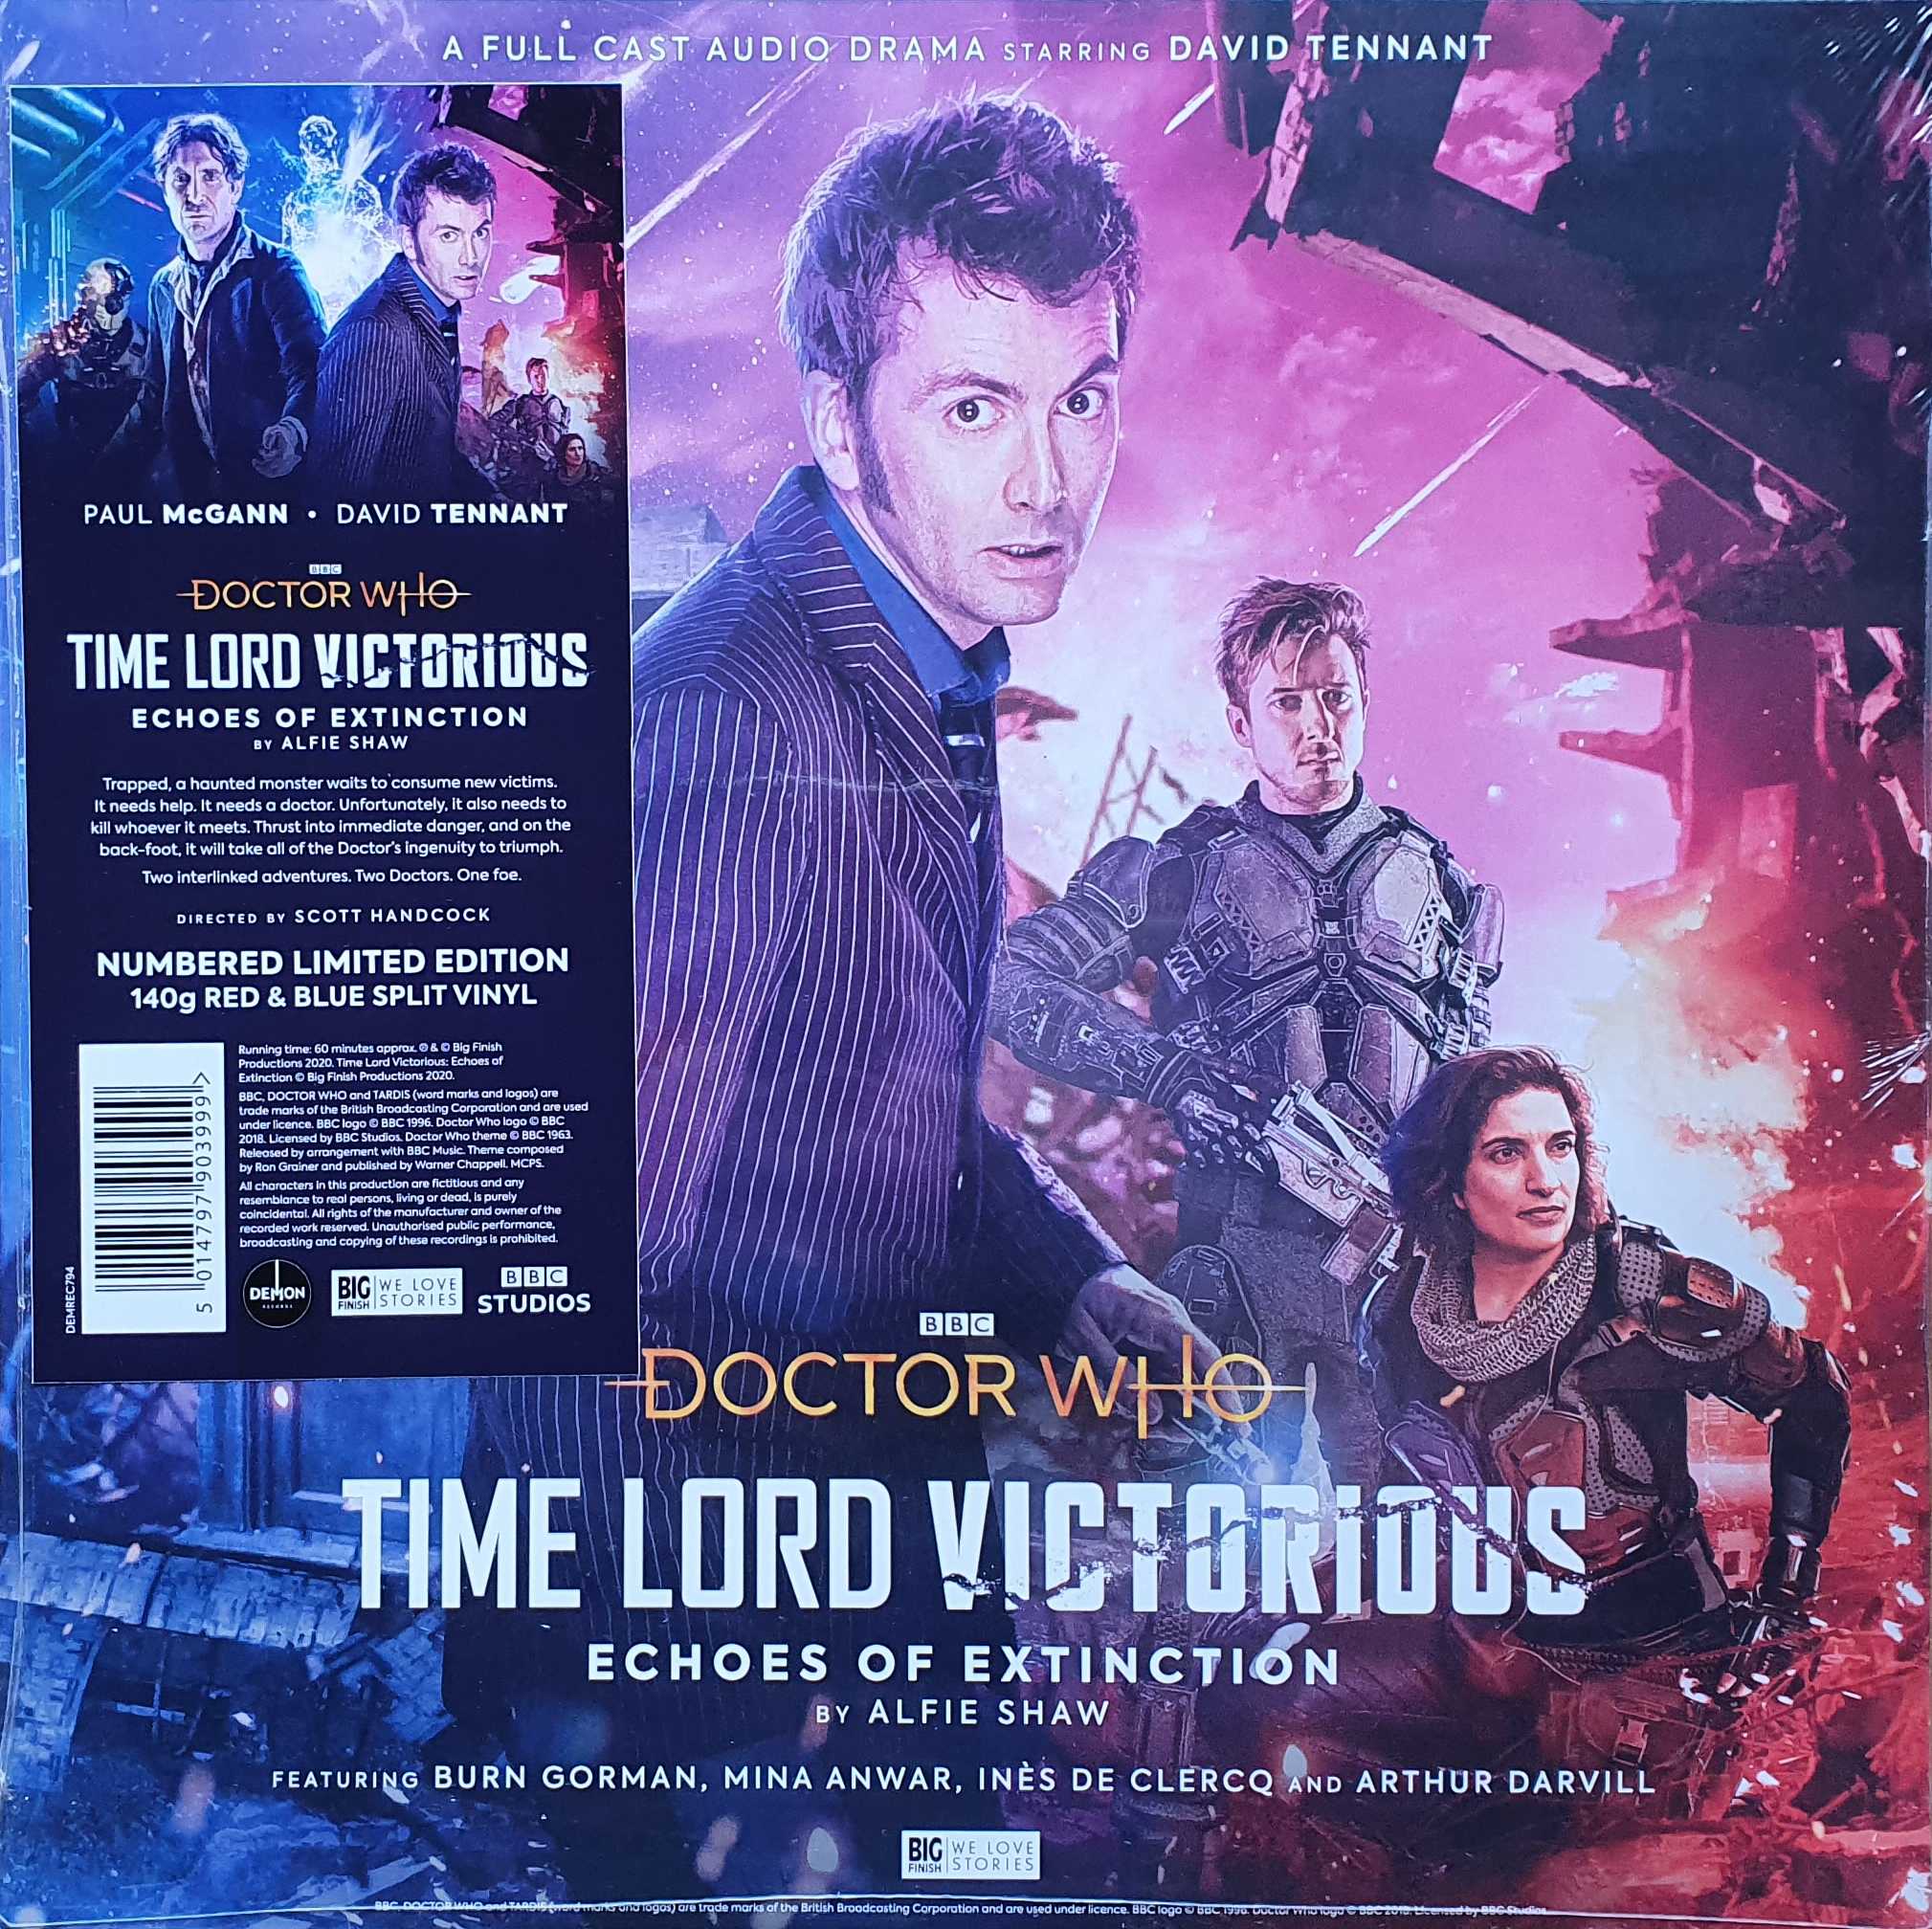 Picture of Time Lord victorious - Echoes of extinction by artist Alfie Shaw from the BBC albums - Records and Tapes library